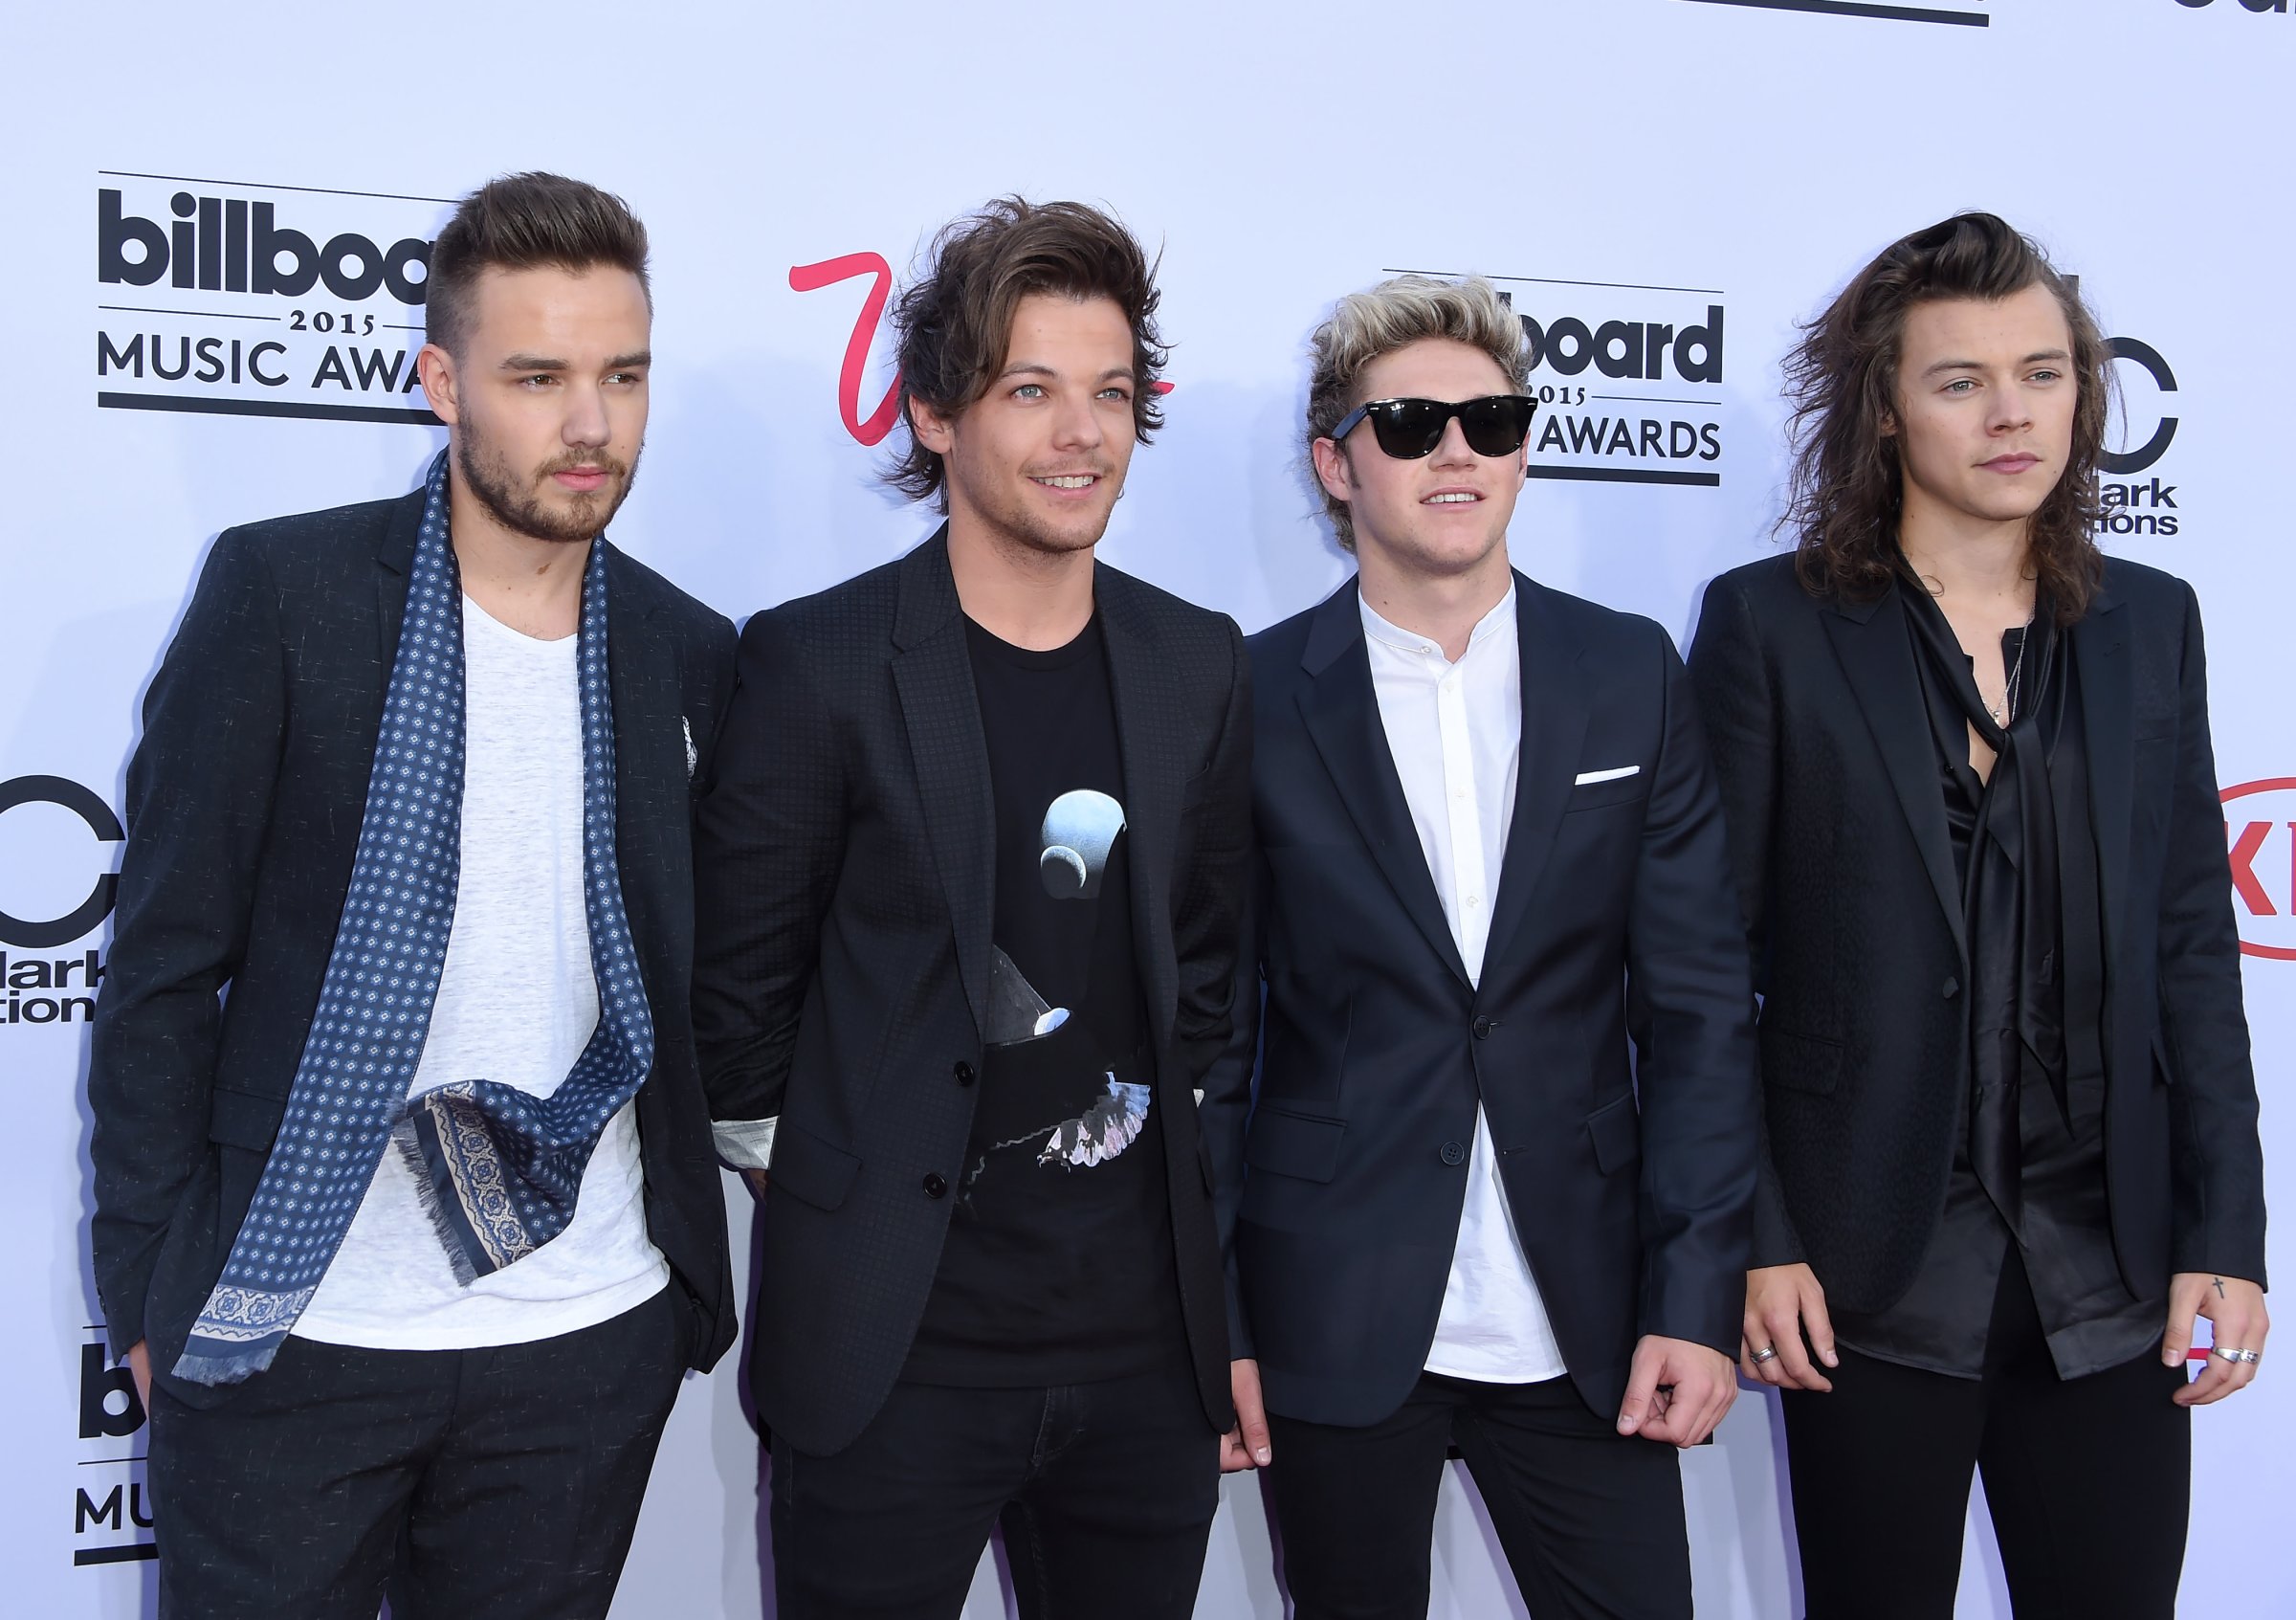 (L-R) Singers Liam Payne, Louis Tomlinson, Niall Horan and Harry Styles of One Direction at the 2015 Billboard Music Awards in Las Vegas on May 17, 2015.